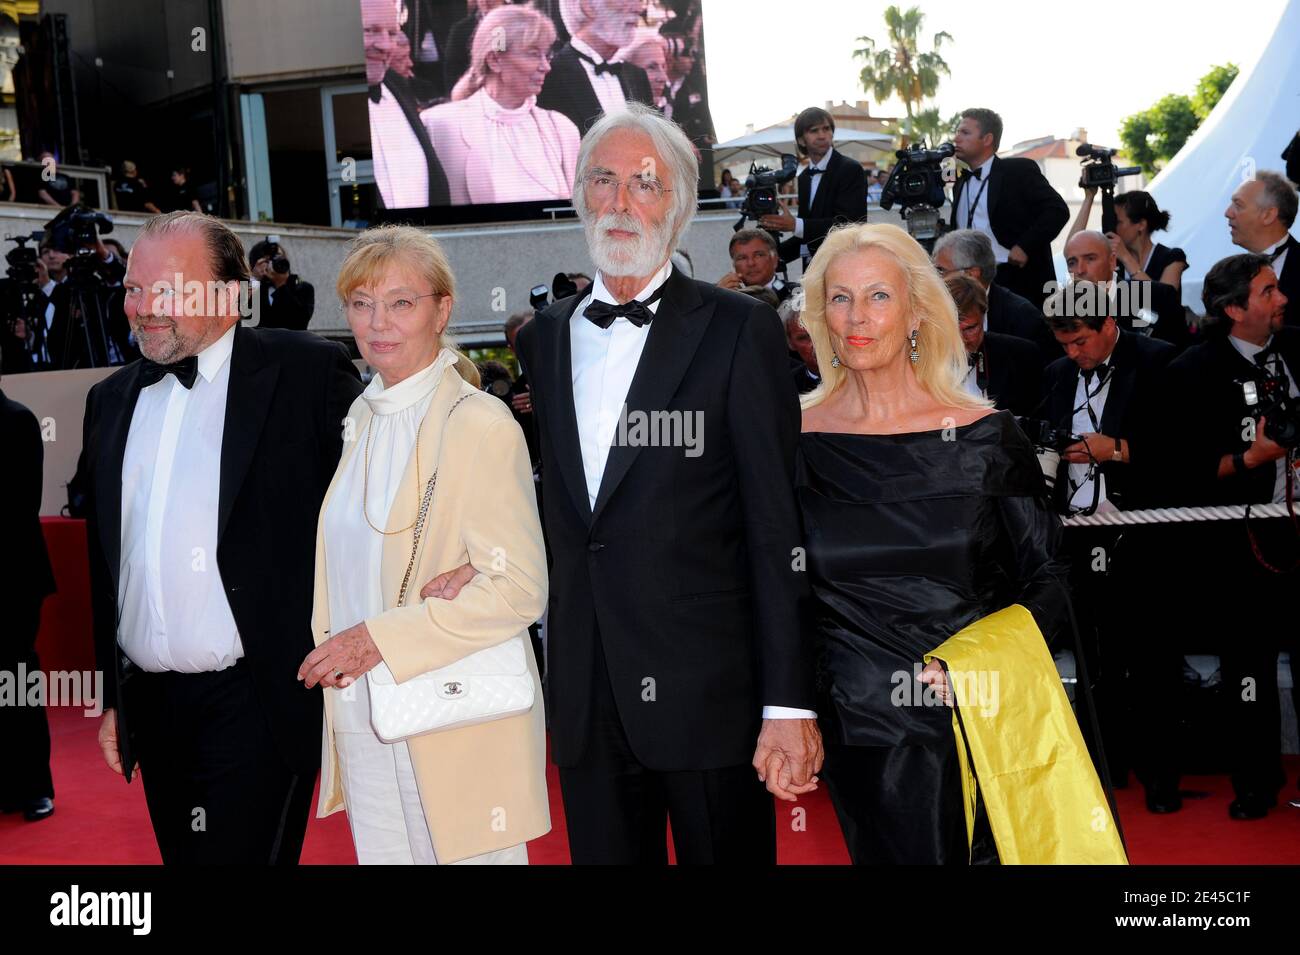 Michael Haneke and his wife arriving for the screening of 'Coco Chanel & Igor Stravinsky' presented hors competition and closing ceremony of the 62nd Cannes Film festival held at the Palais des Festivals in Cannes, France on May, 24 2009. Photo by Nebinger-Orban/ABACAPRESS.COM Stock Photo